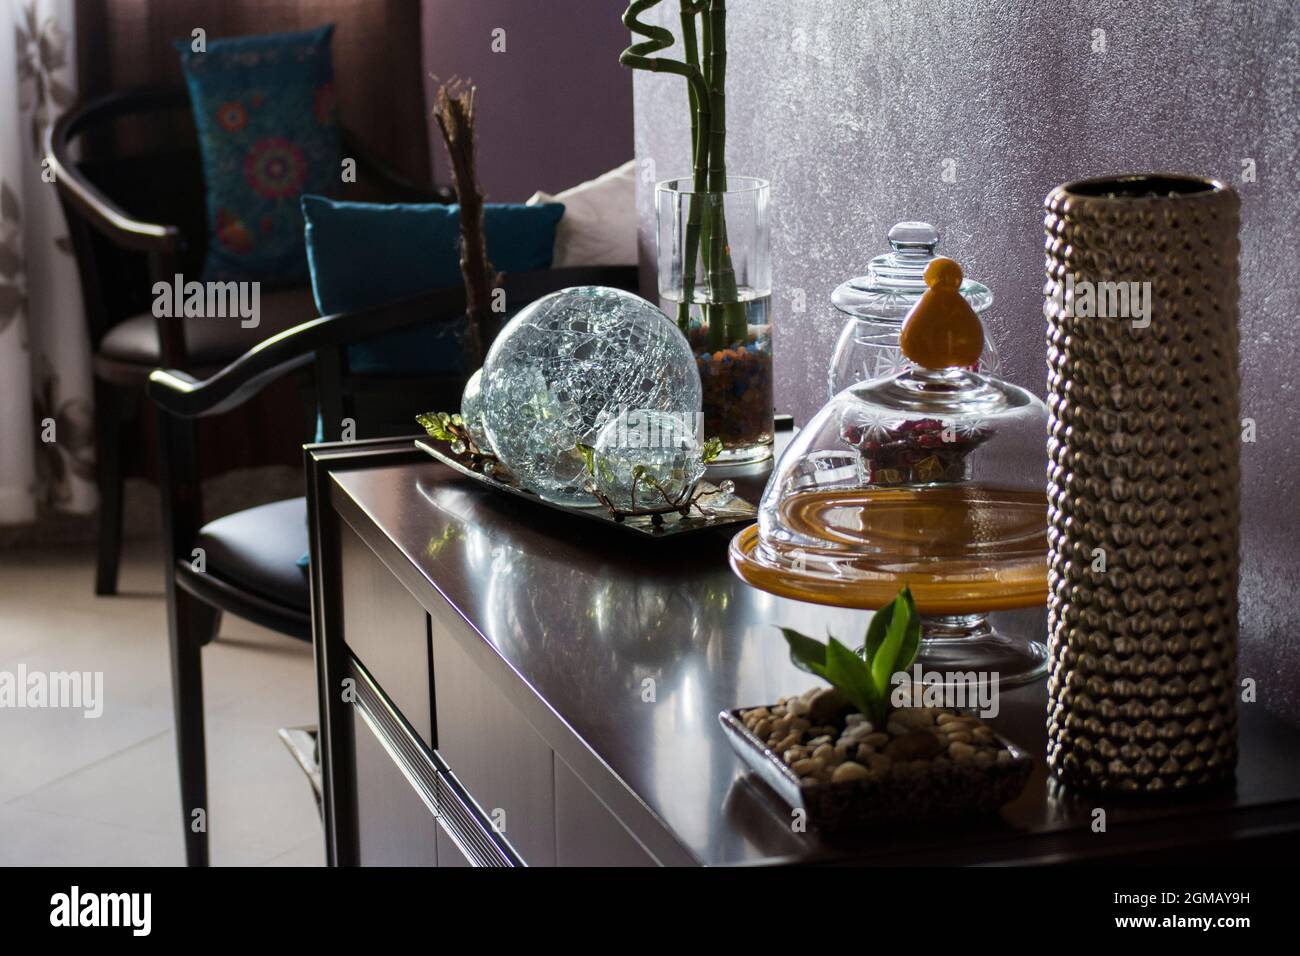 Interior of an apartment decorated with various objects made of glass, wood and plastic. Chairs, tables and pictures are part of the decoration. Stock Photo